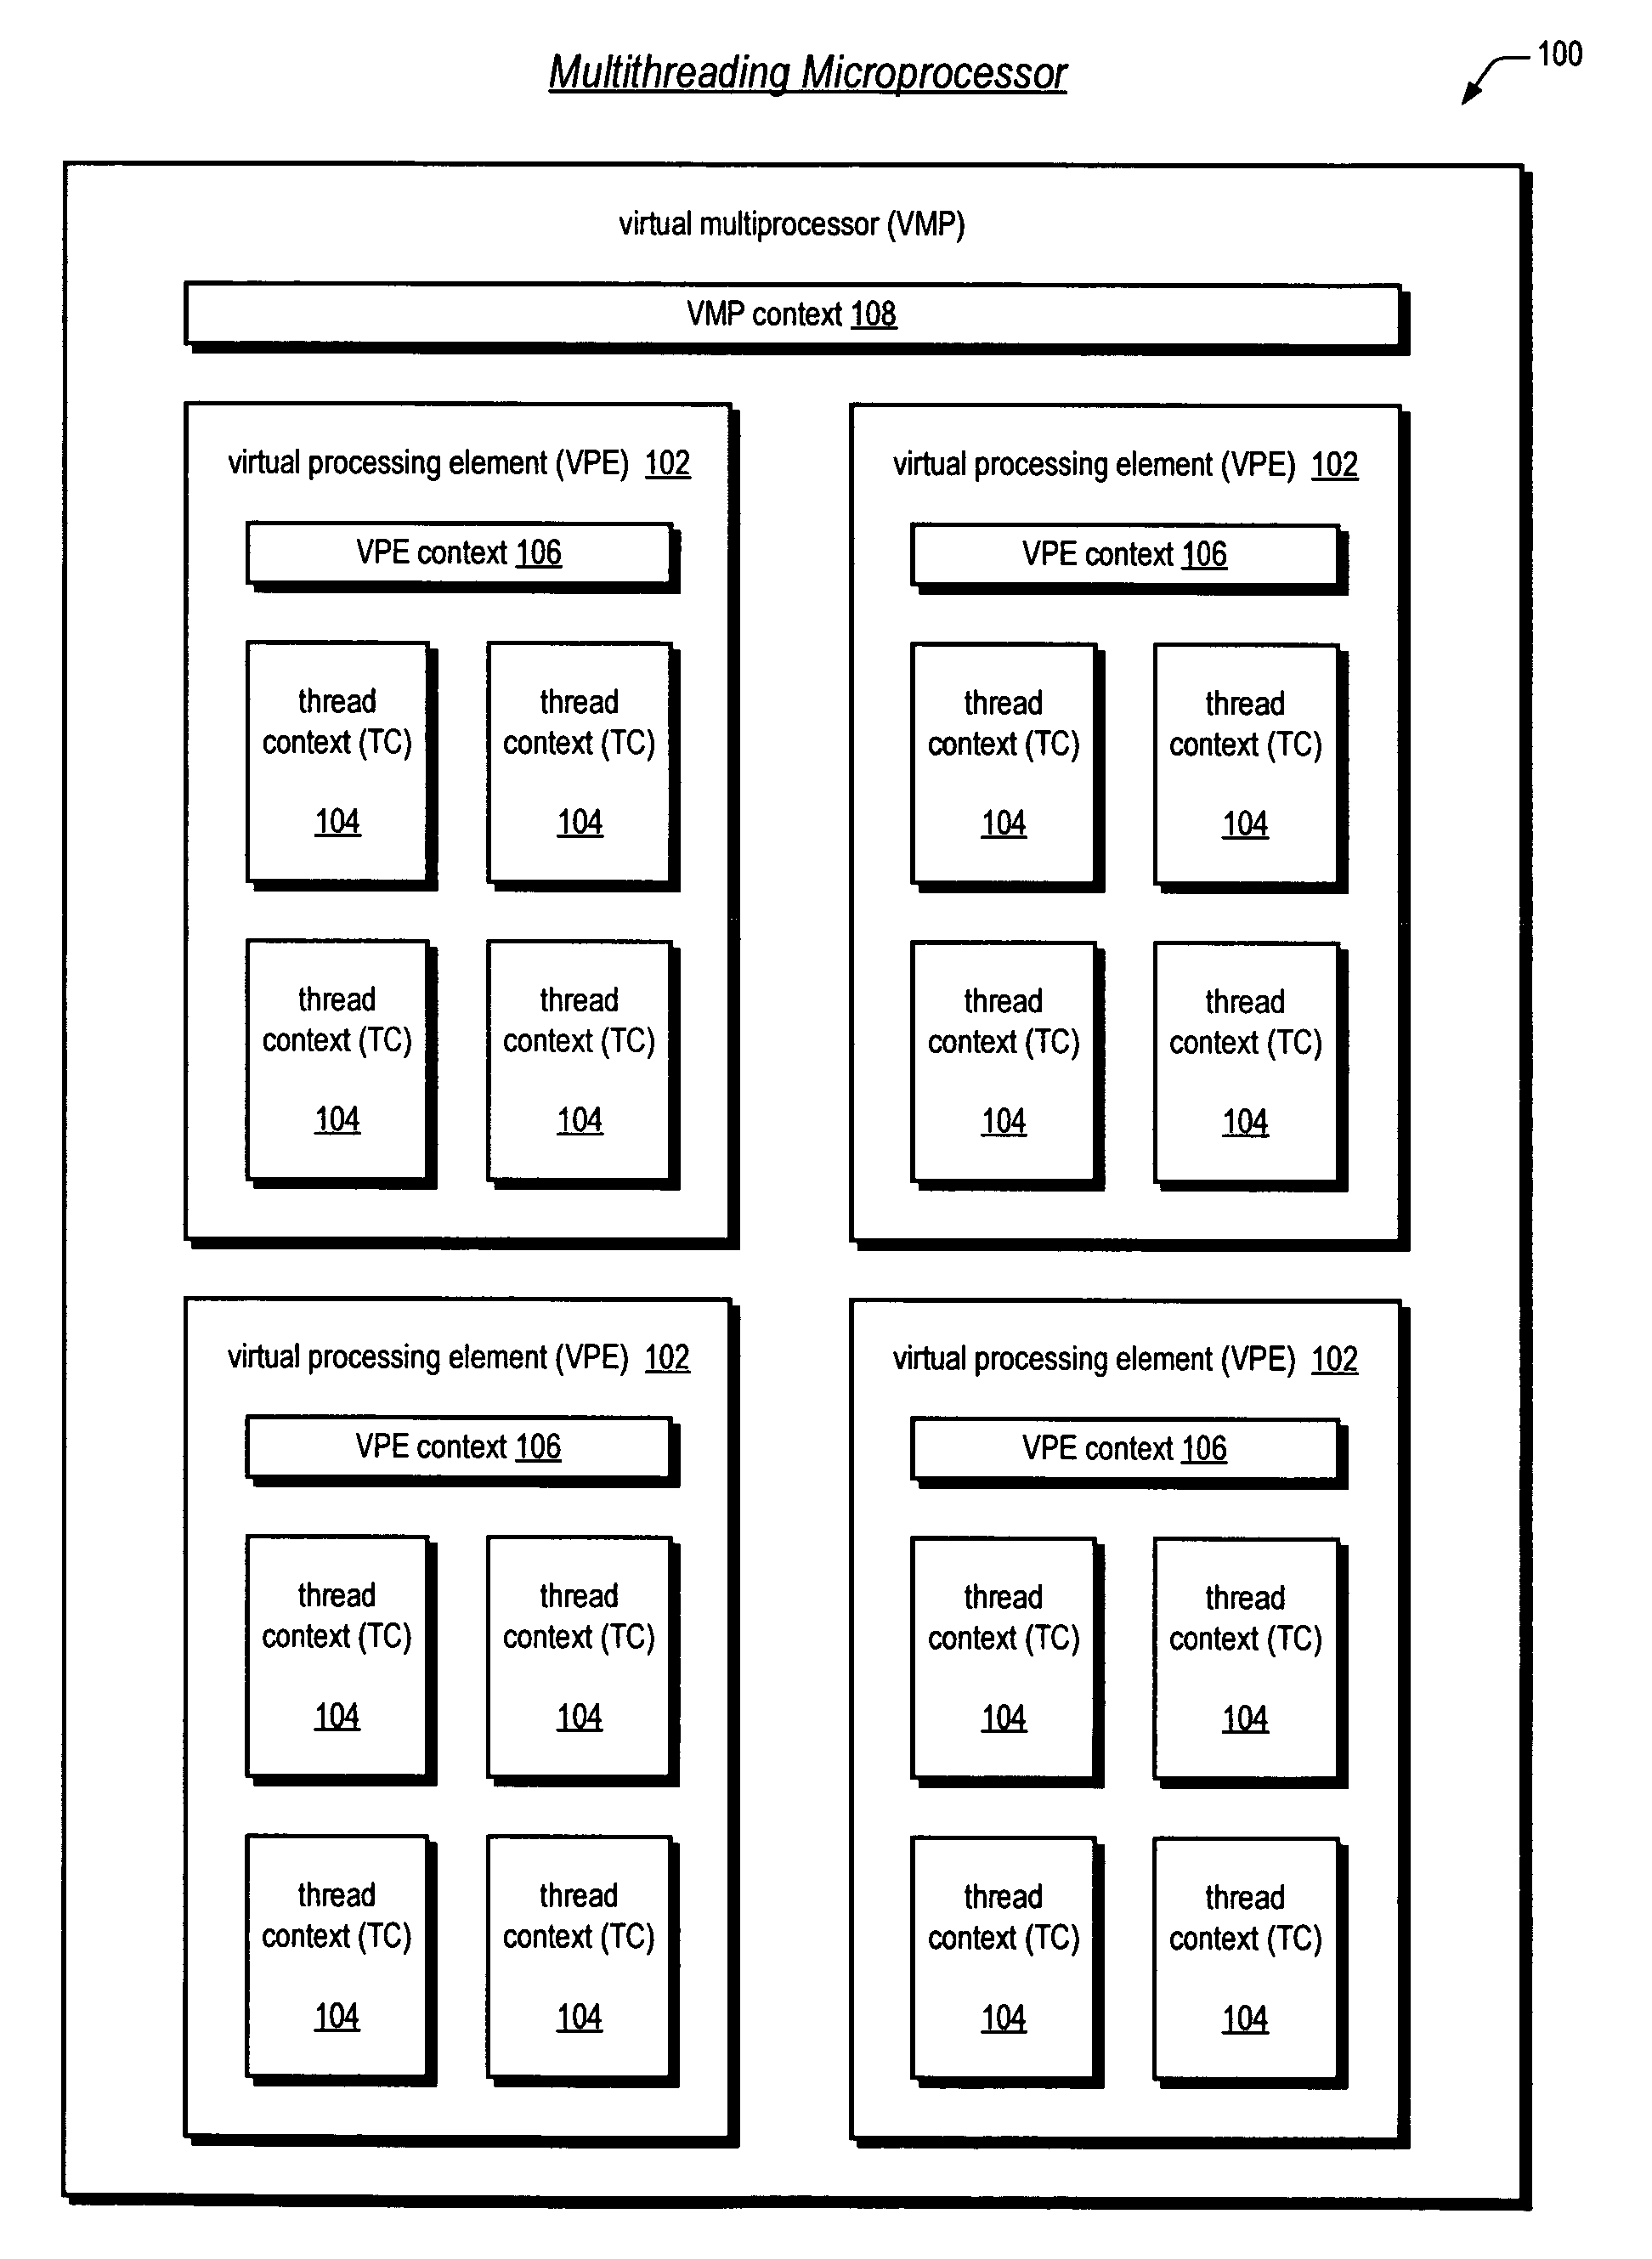 Software emulation of directed exceptions in a multithreading processor